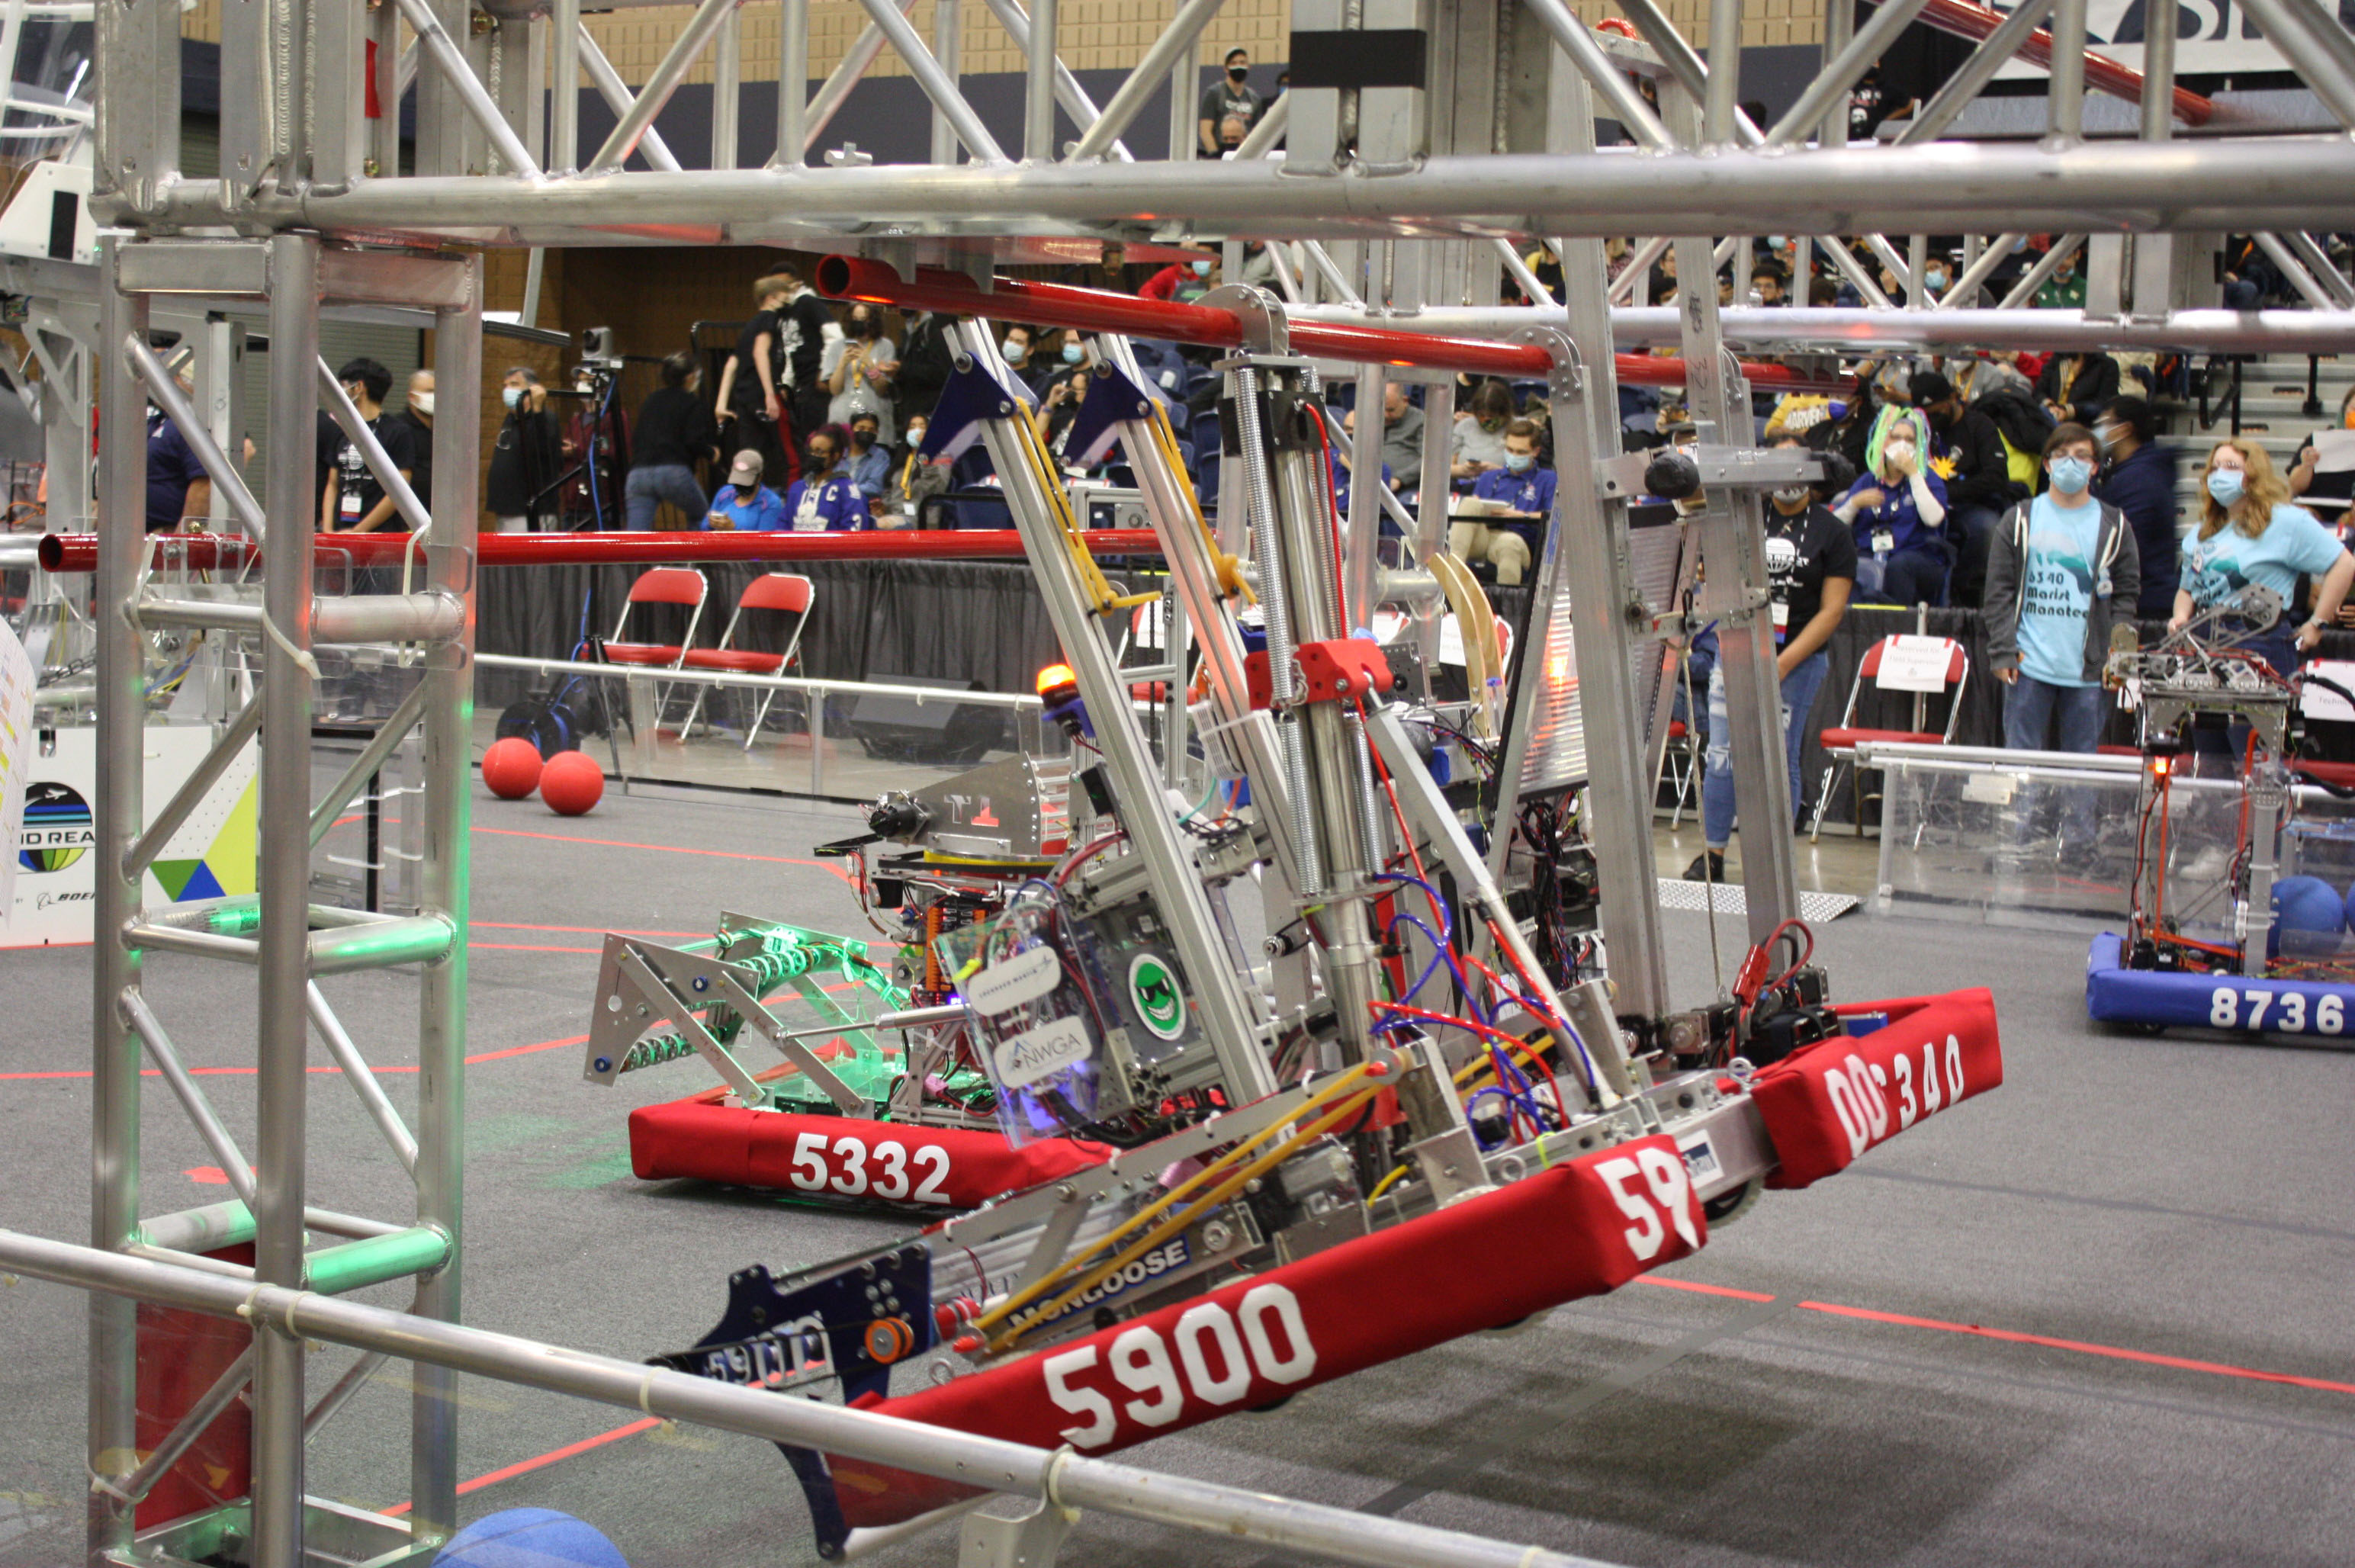 The Career Blazer Robotics - Fighting Mongooses from the Northwest Georgia Career Academy score points when the team’s robot hangs from a bar during a qualification match.